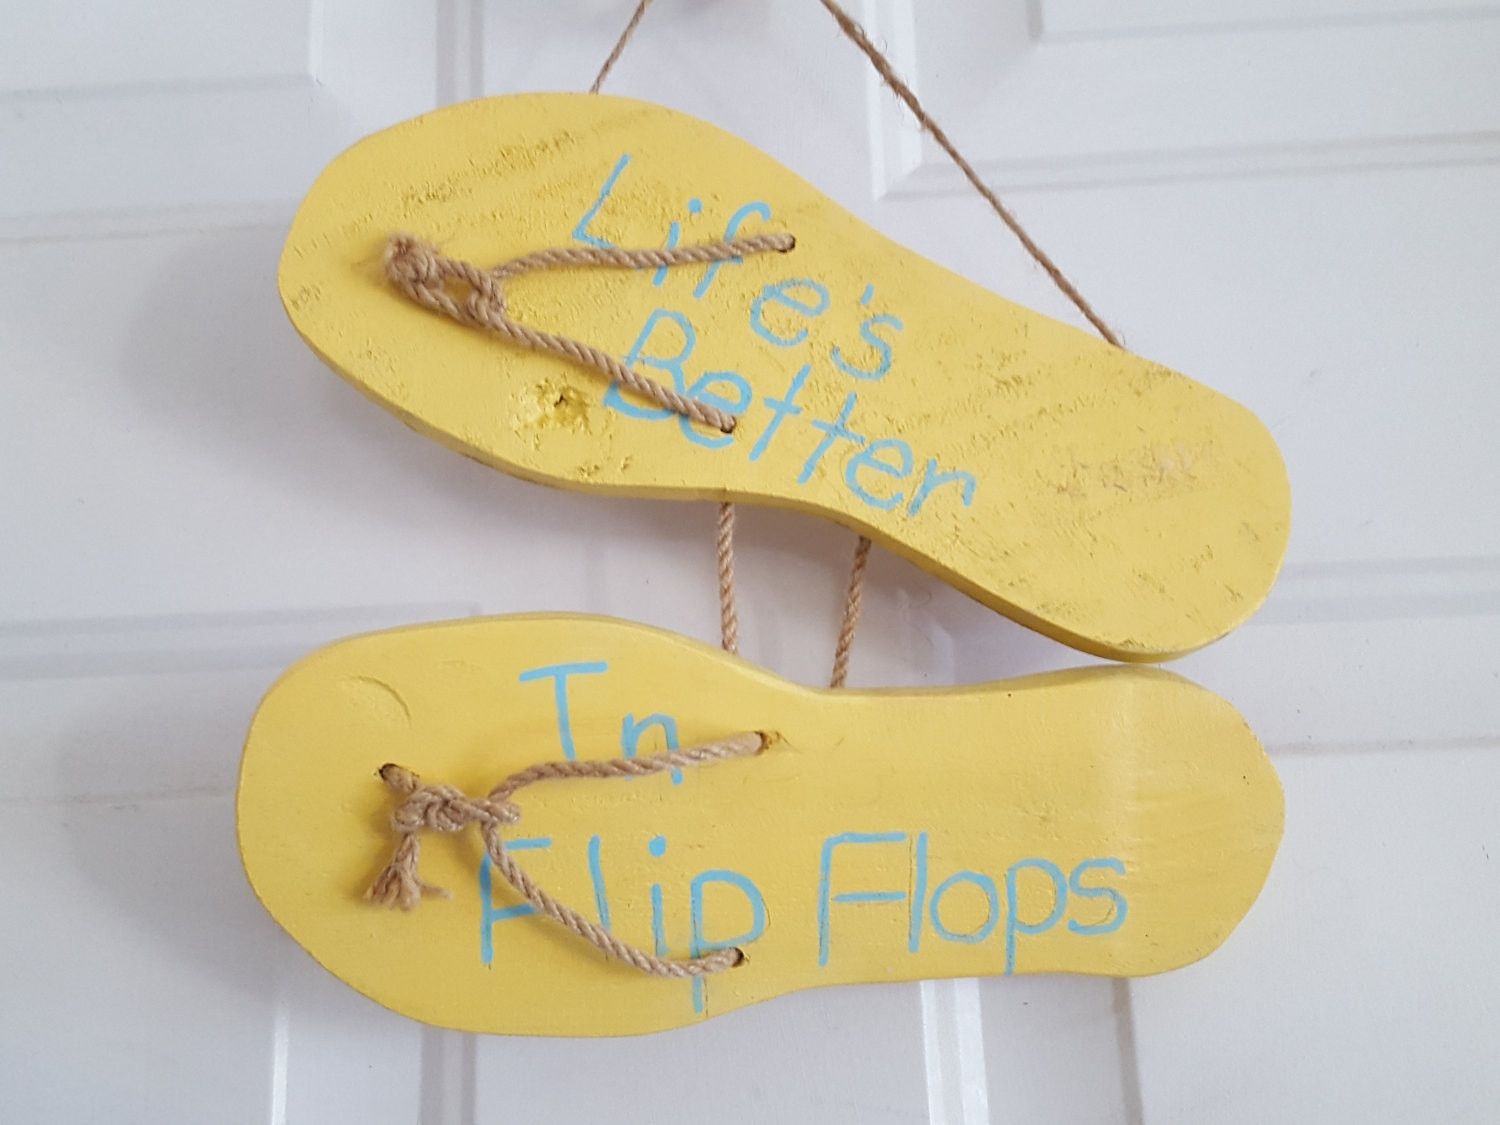 Fine Flip Flop Wall Decor Gift The Art Decorations On And Throughout Flip Flop Wall Art (View 14 of 20)